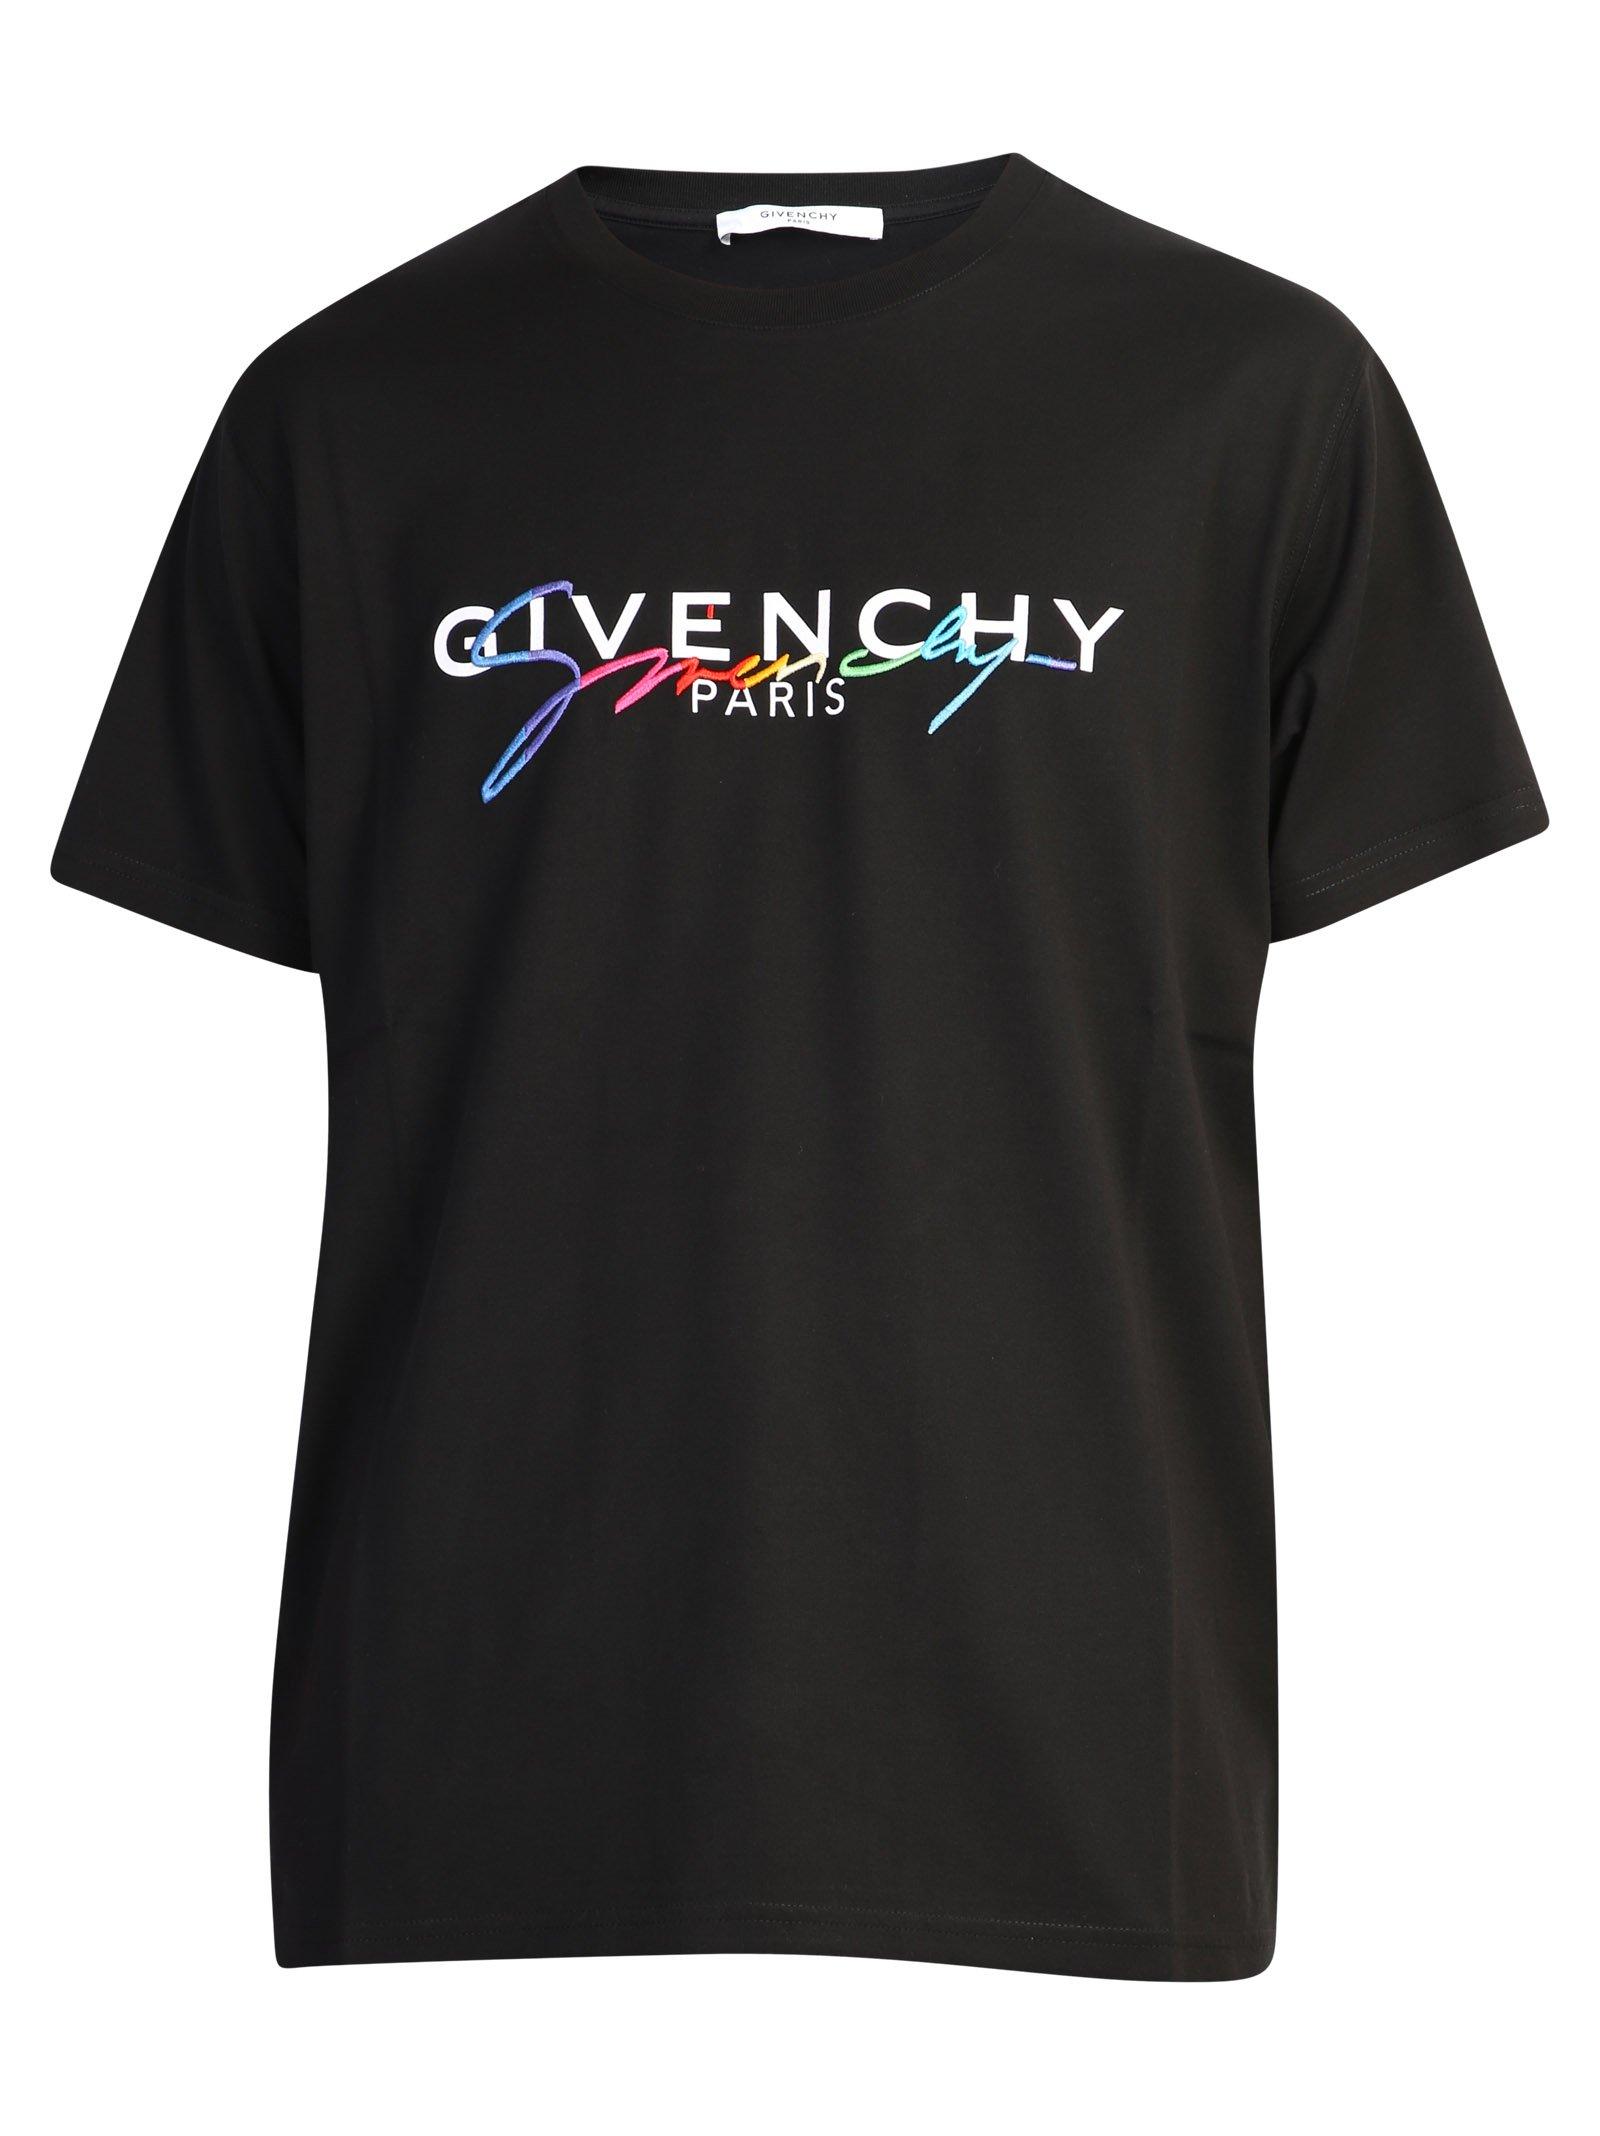 Givenchy Cotton Double Logo T-shirt in Black for Men - Save 30% - Lyst